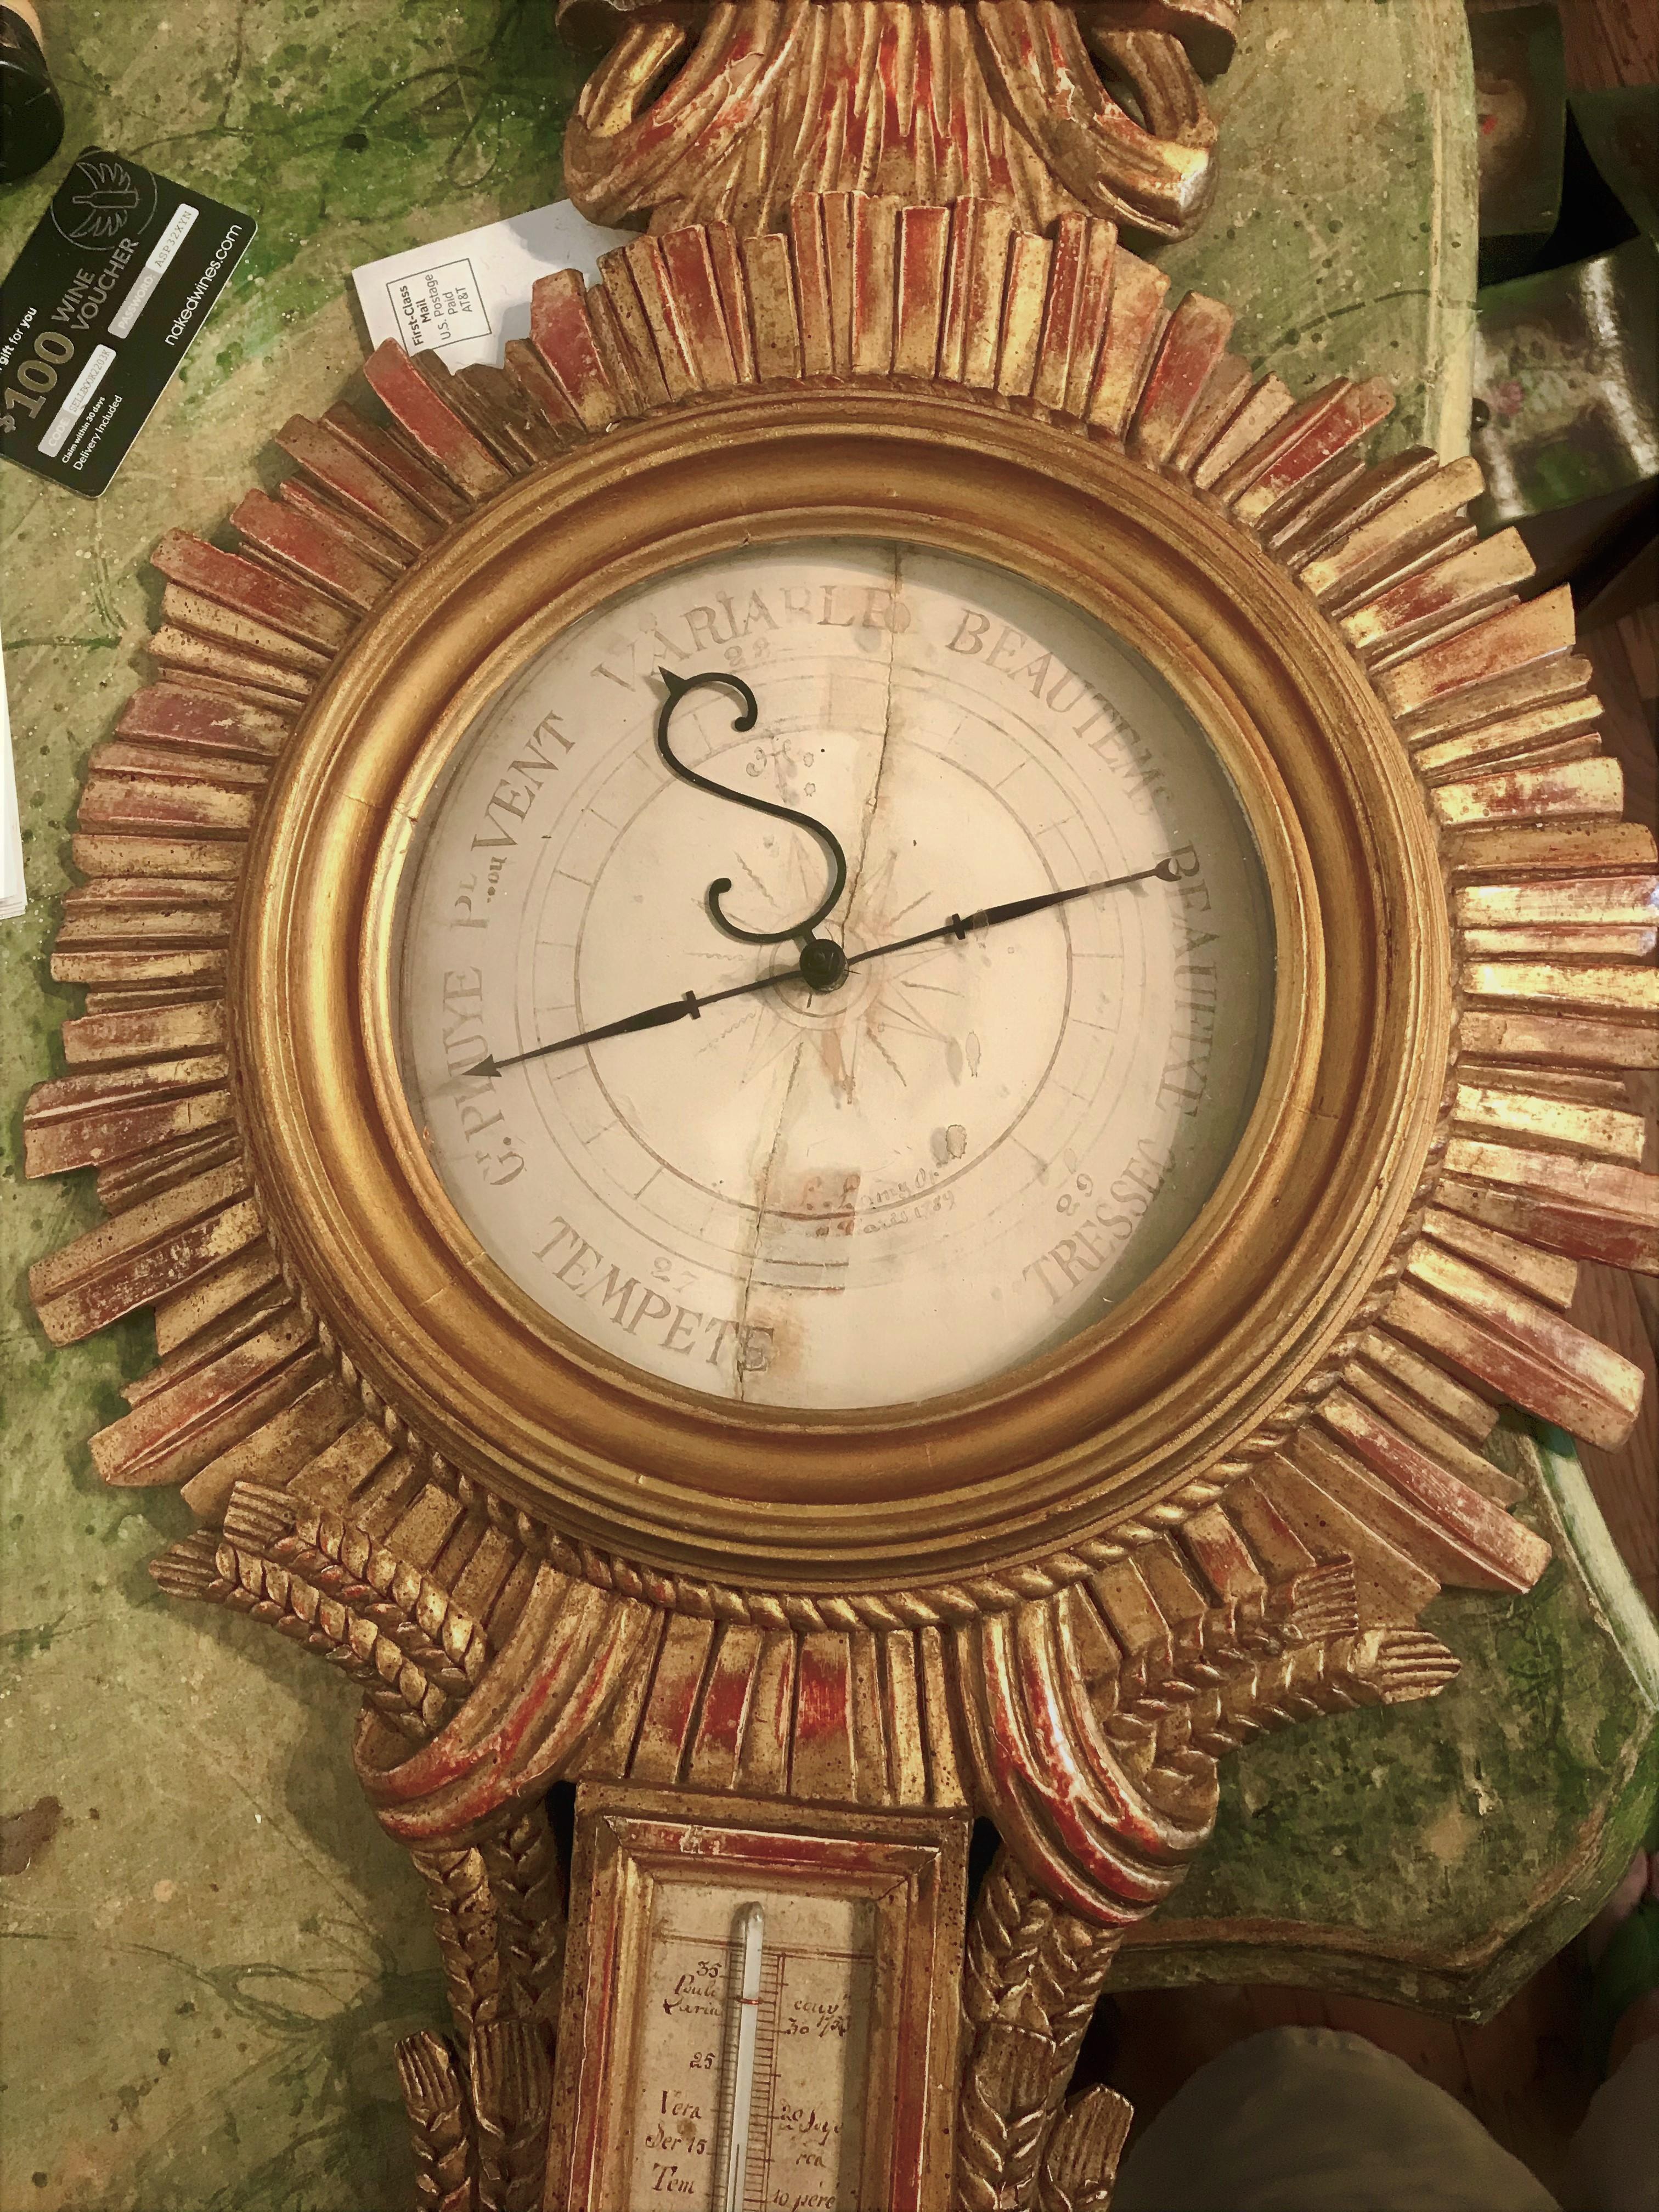 French gilt barometer case, early 1900's incorporating earlier 18th century parts. The center wood facing dated 1789 and encased by a rare or at least unusual carved sunburst .Presents very well with bleeding of red bole against the gilding . Highly